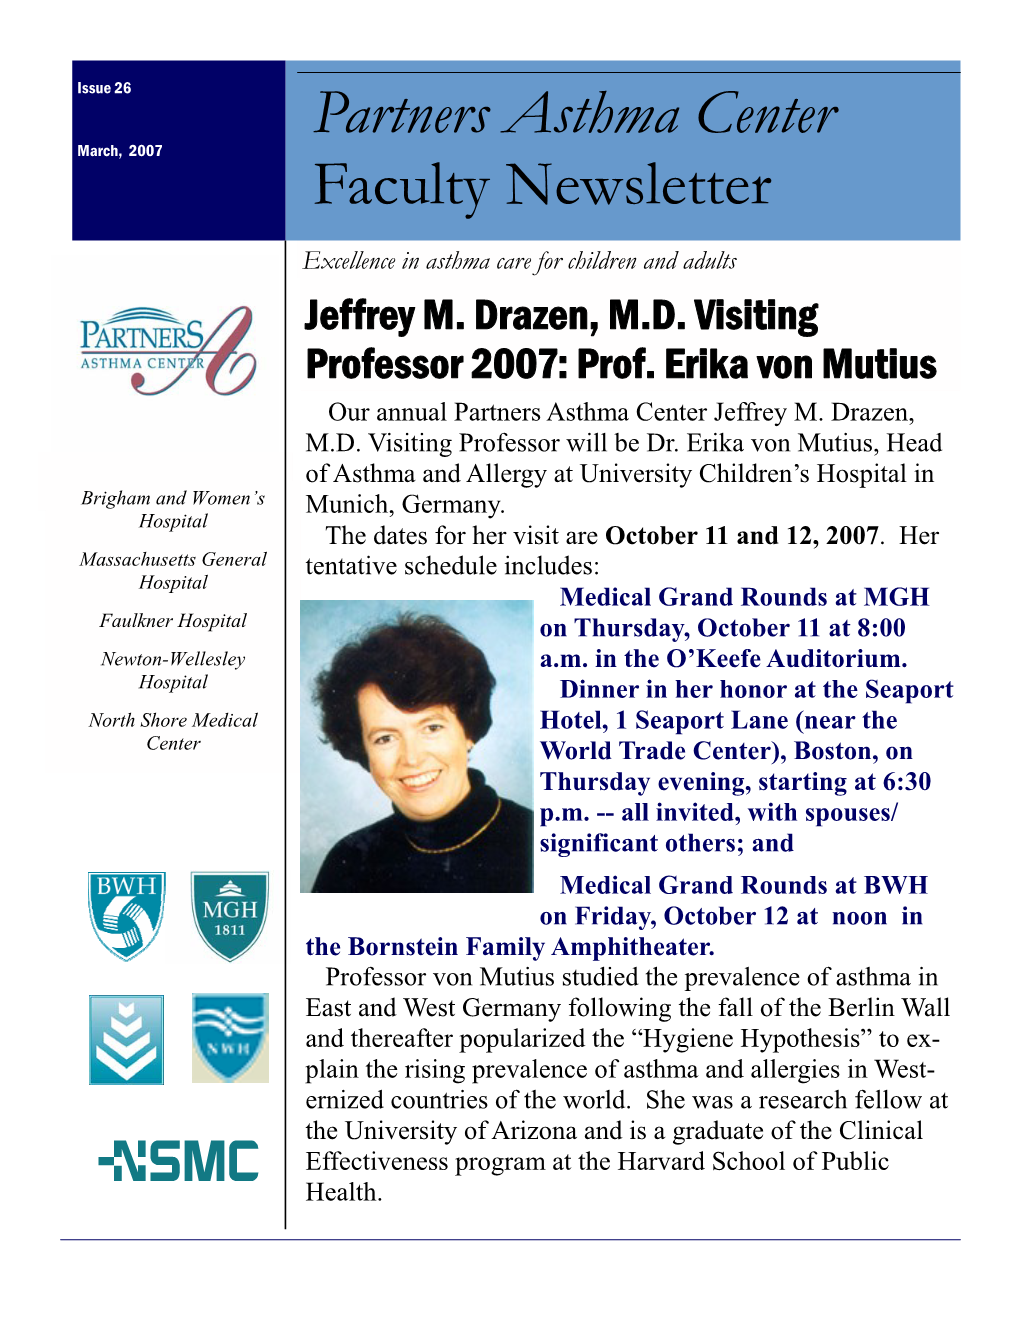 Partners Asthma Center Faculty Newsletter